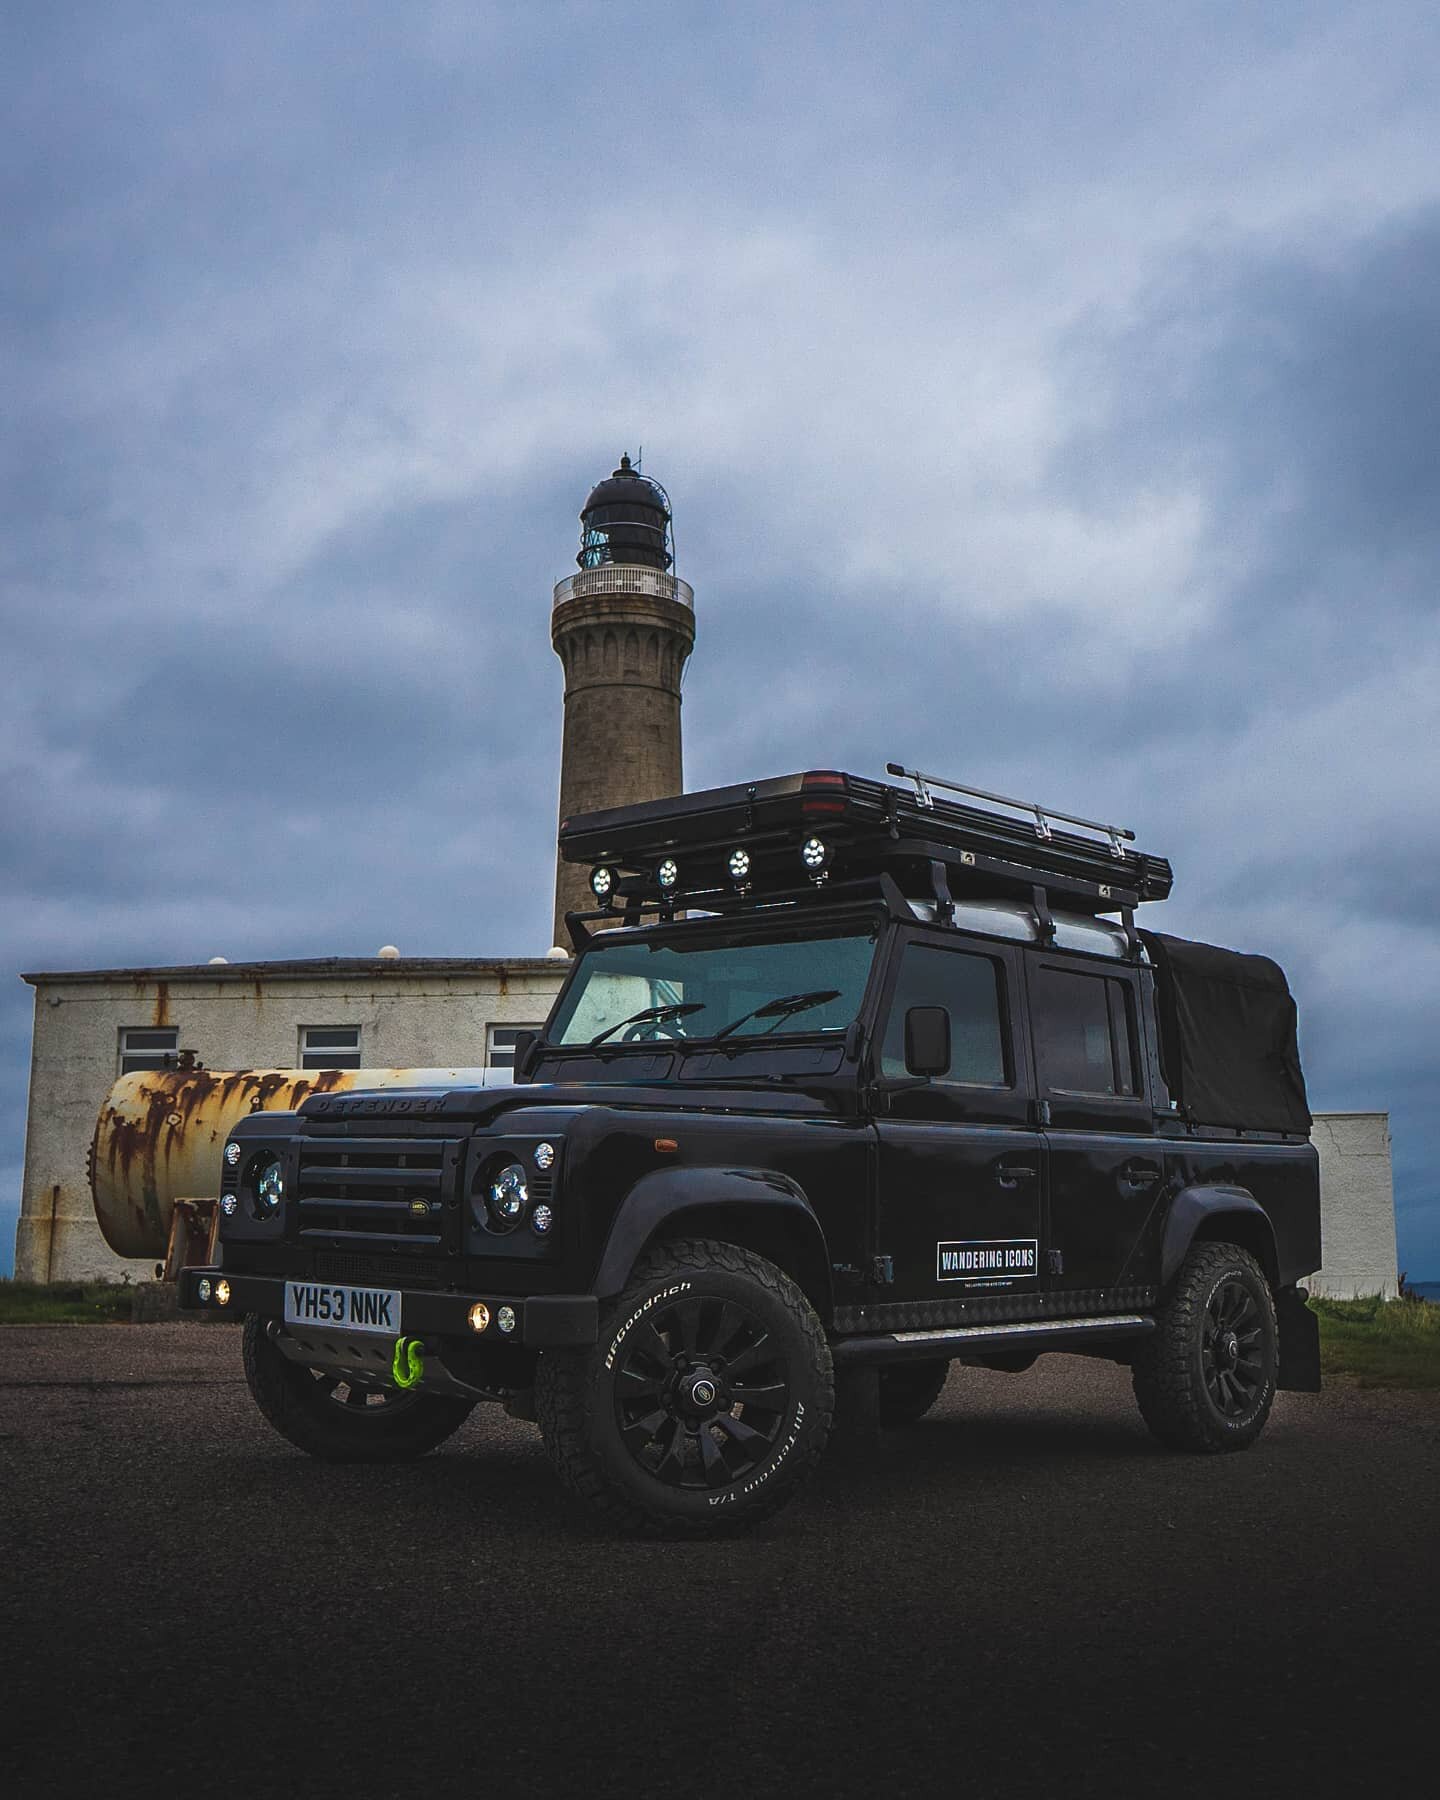 Our lovely #doublecab made it to the most westerly point on the #britishisles, but do you know where? 

Hope everyone's having an adventurous weekend 💯

#visitscotland2020 #isleofskye #visitaviemore #visitscotland #aviemore #scotlandiger #yourscotla